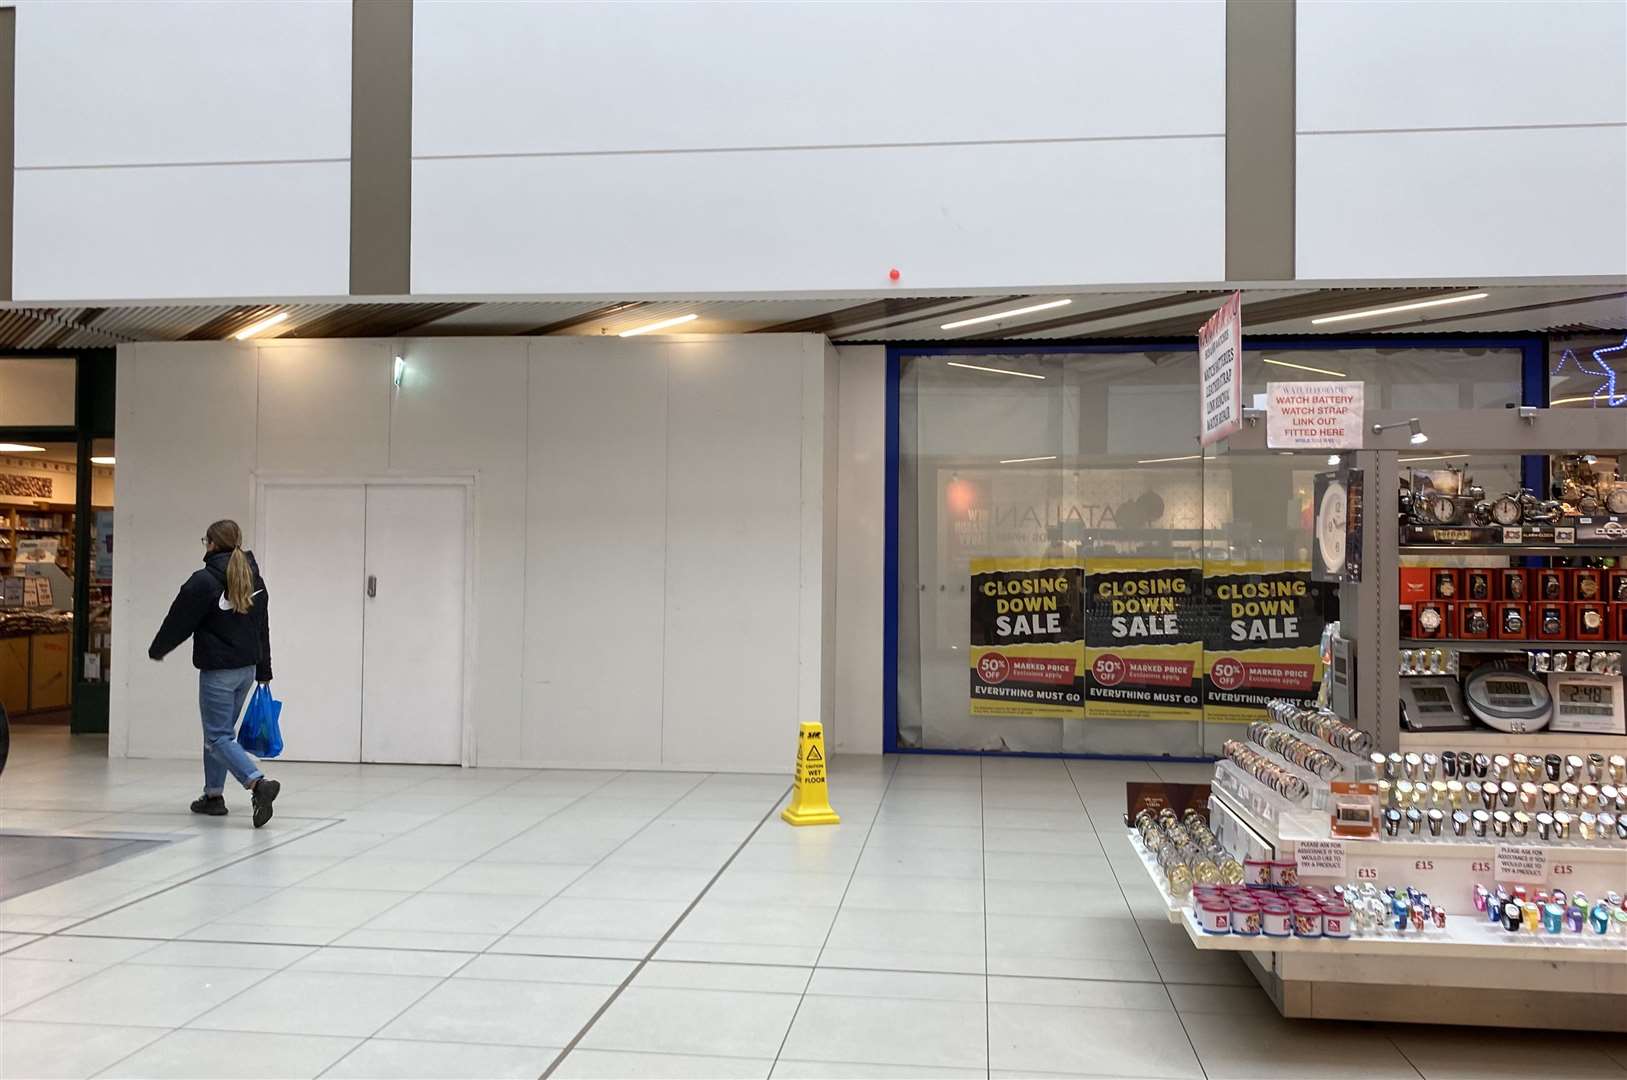 The Entertainer in The Mall, Maidstone, has now closed